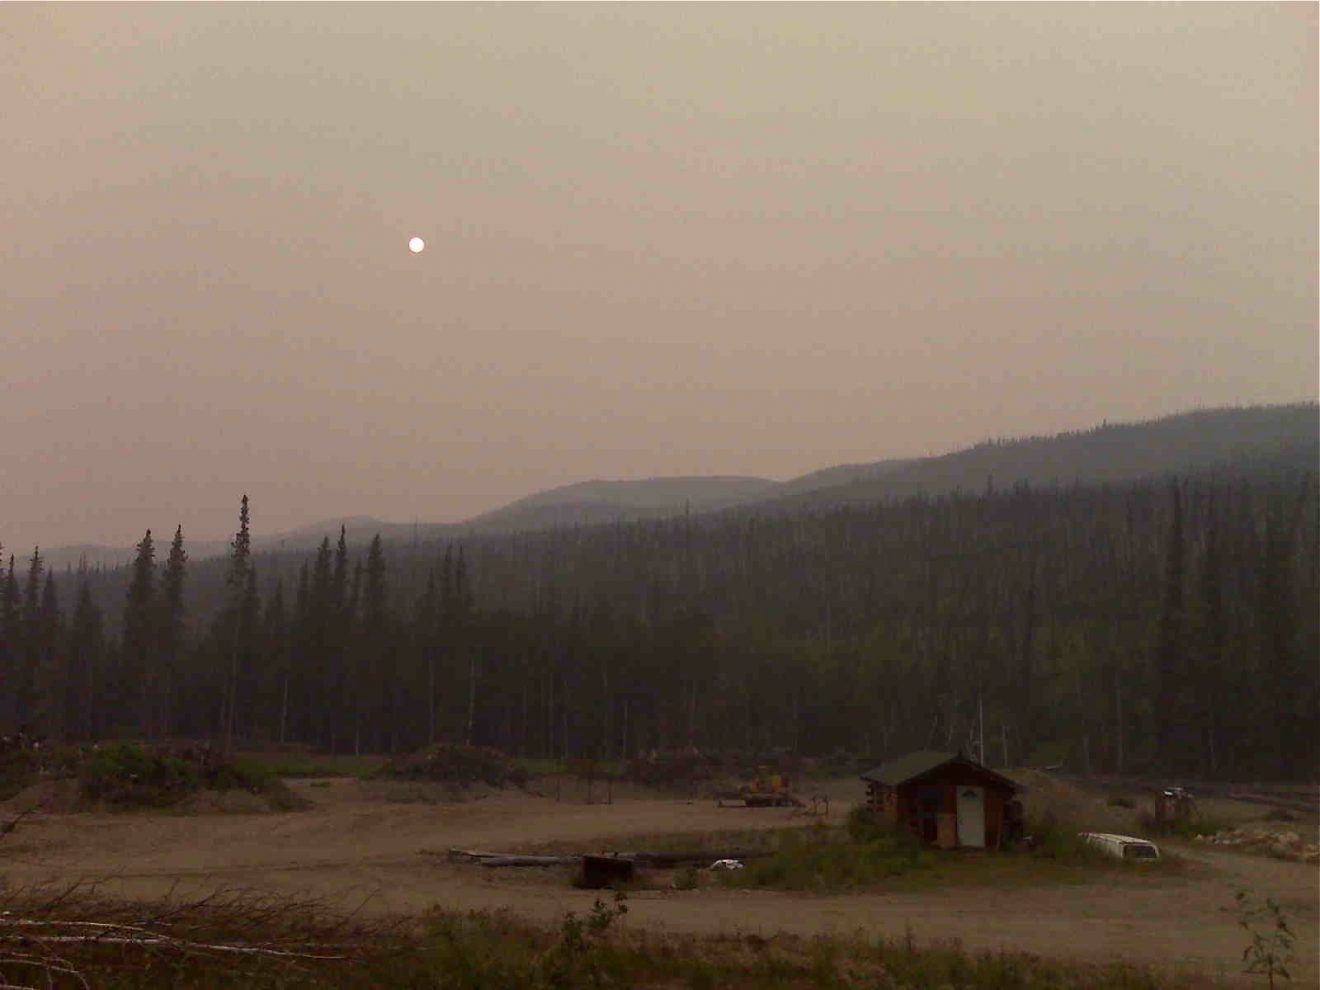 Research aims to help Alaskans, visitors avoid wildfire smoke